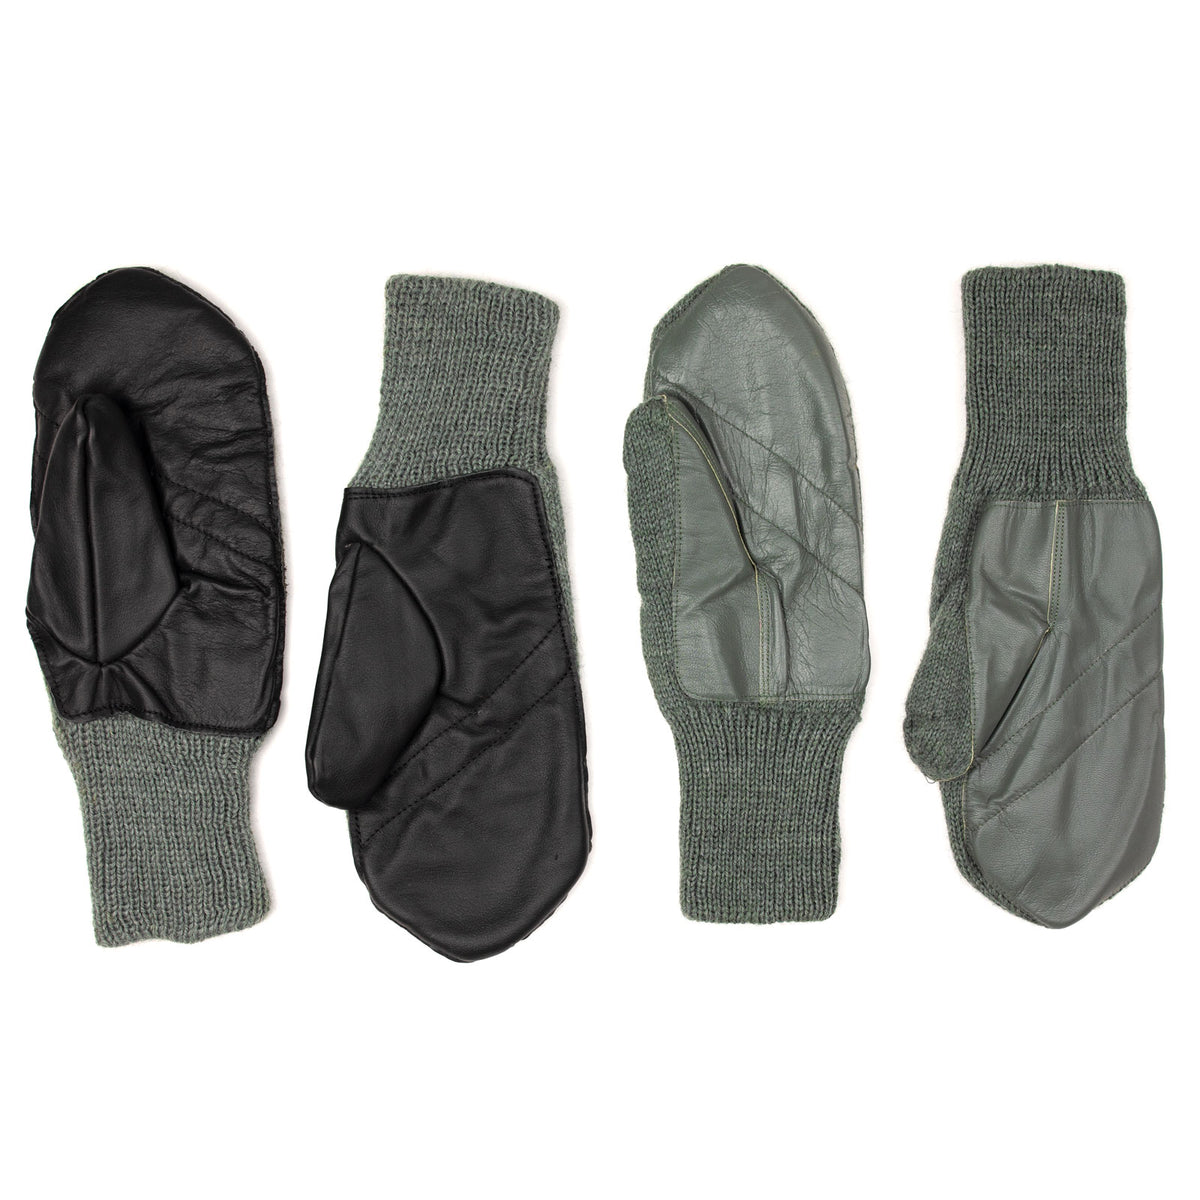 Swiss Military Wool Mittens With Leather Palm